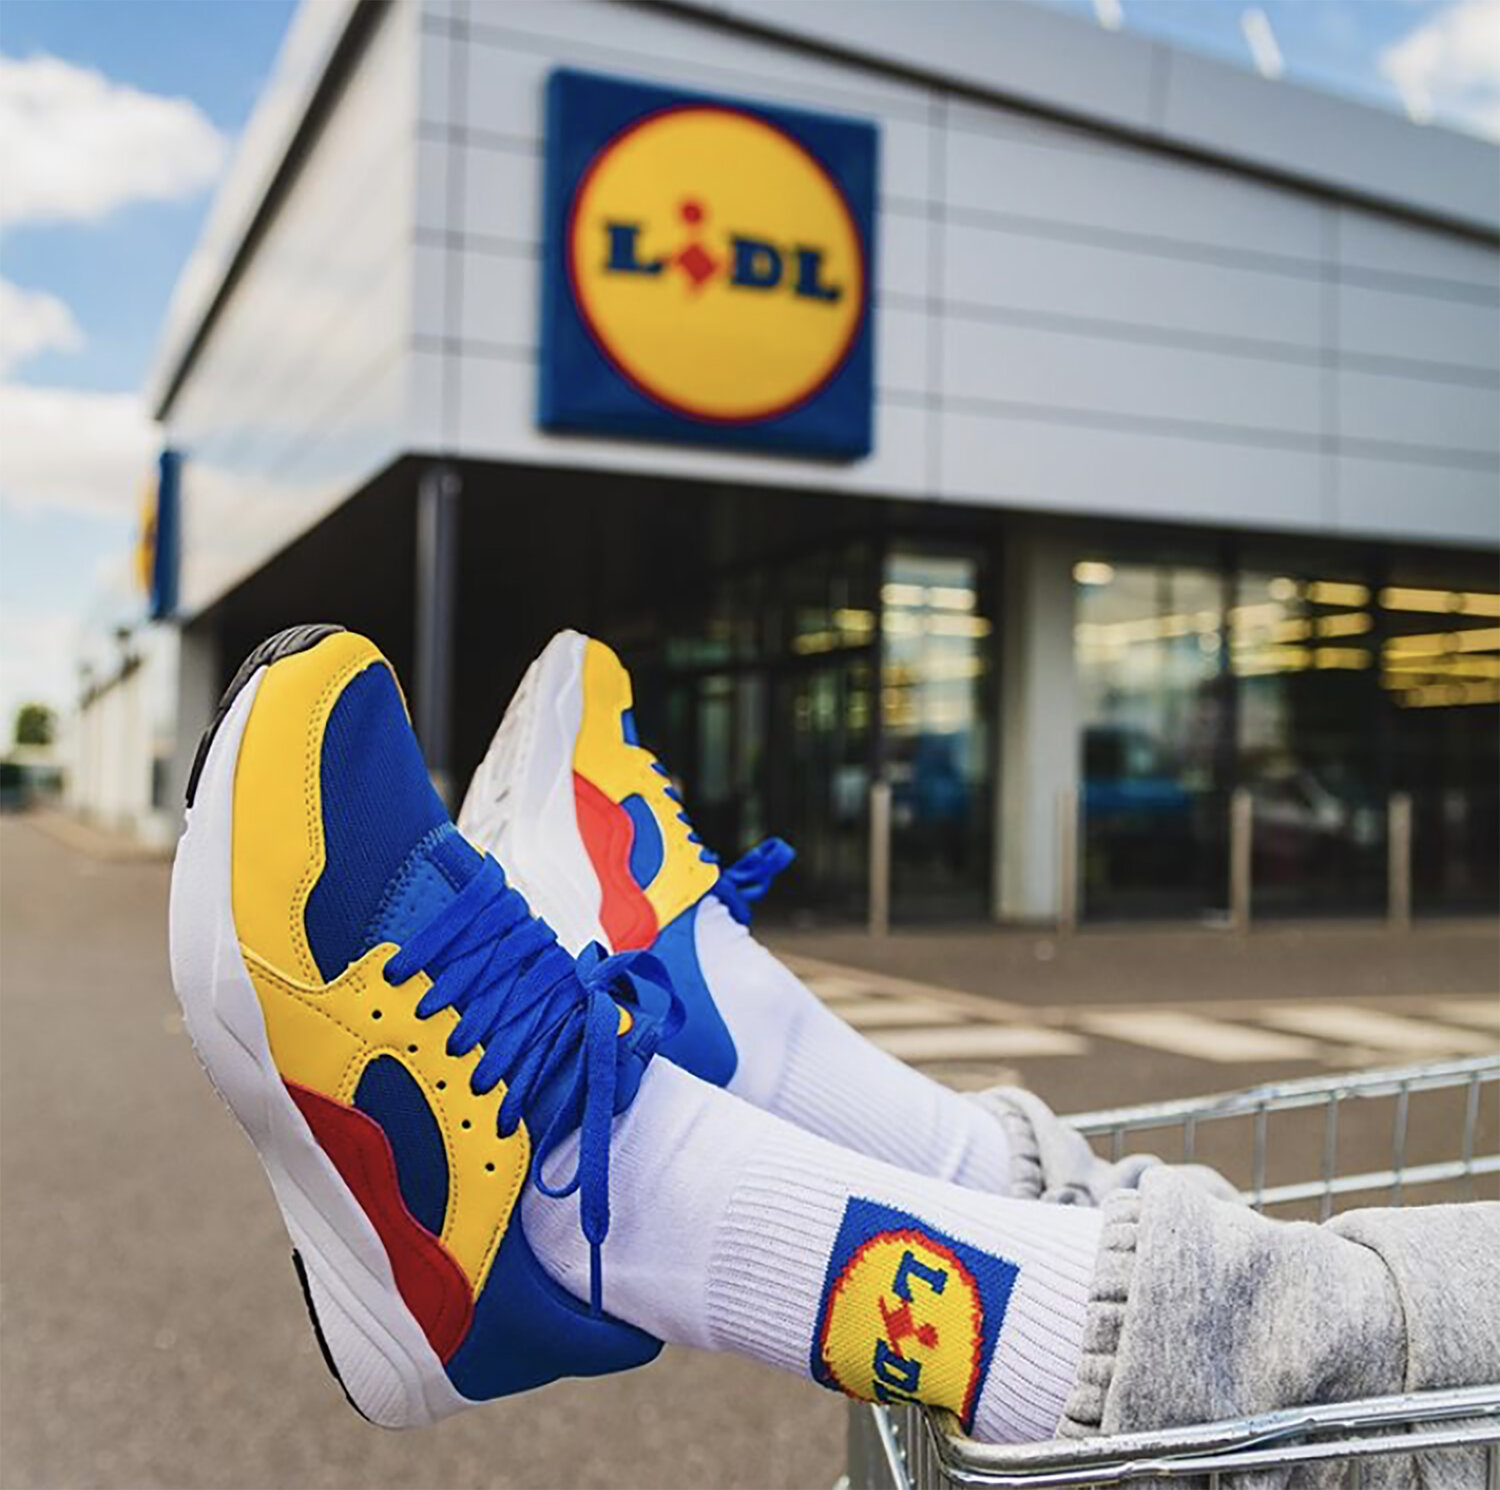 You Played Yourself If You Bought Lidl's Knockoff Sneakers